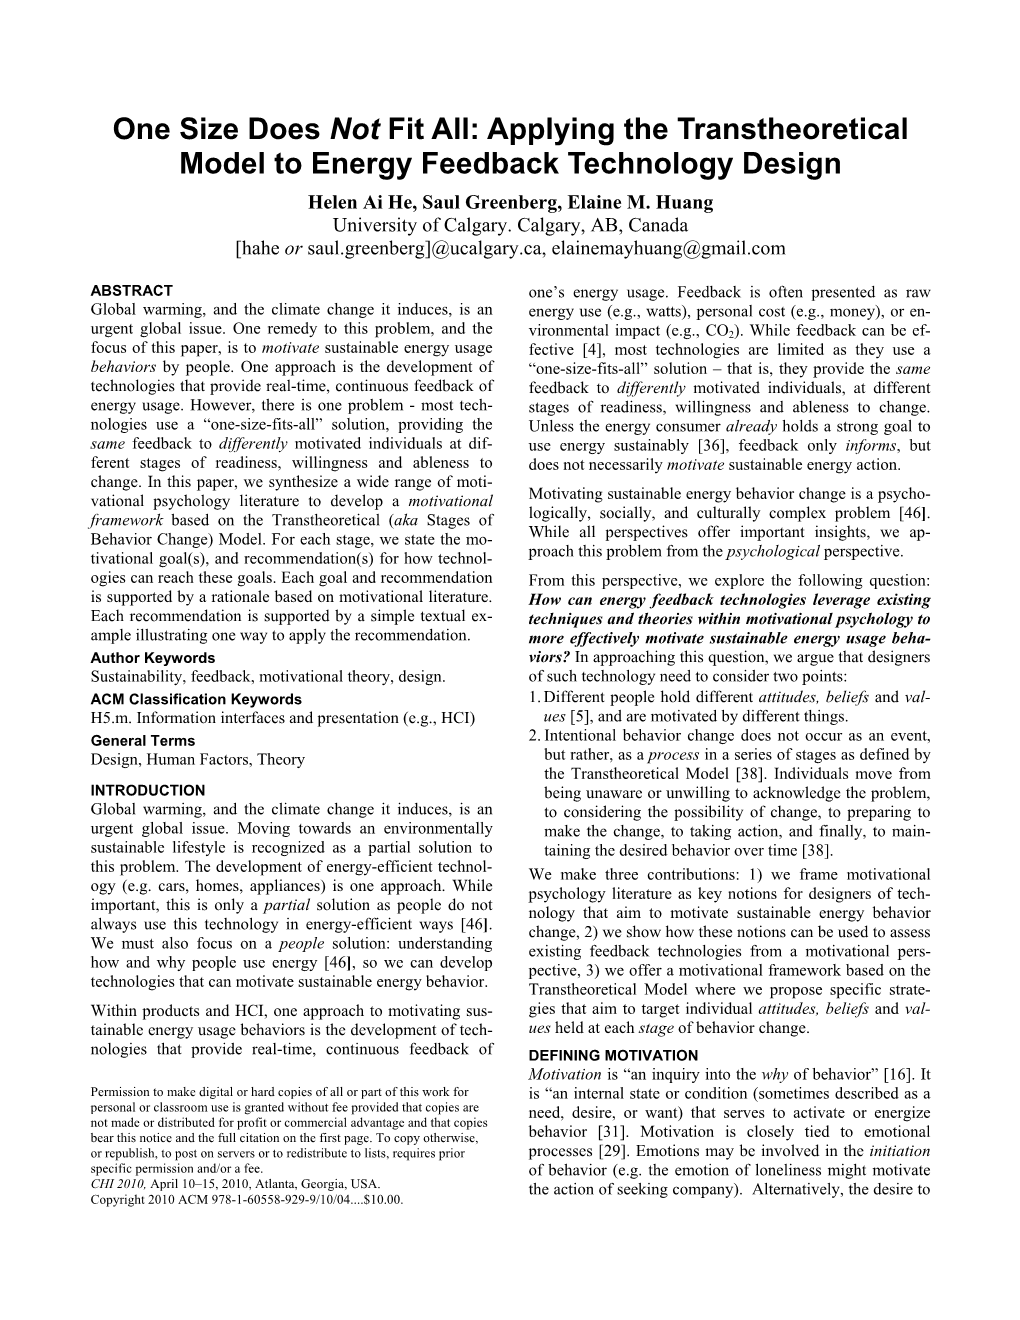 One Size Does Not Fit All: Applying the Transtheoretical Model to Energy Feedback Technology Design Helen Ai He, Saul Greenberg, Elaine M